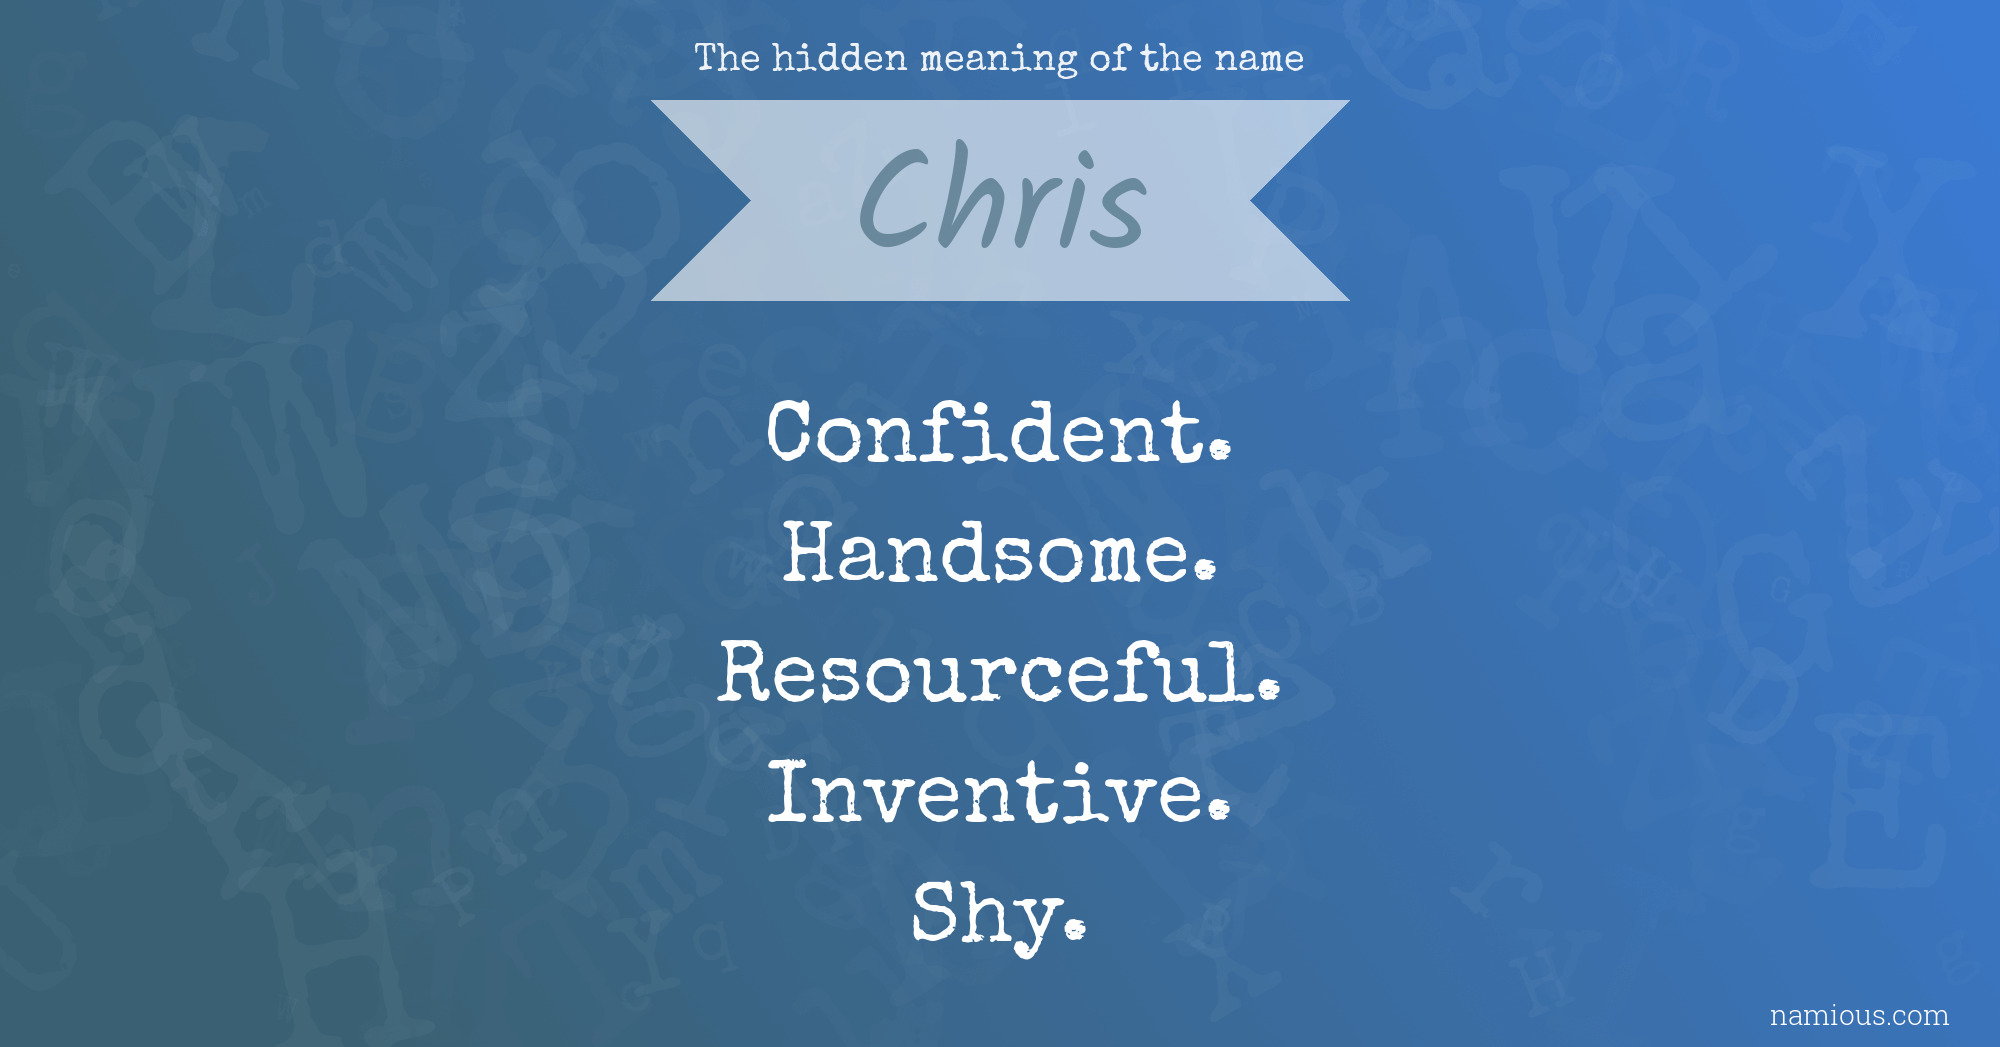 The hidden meaning of the name Chris